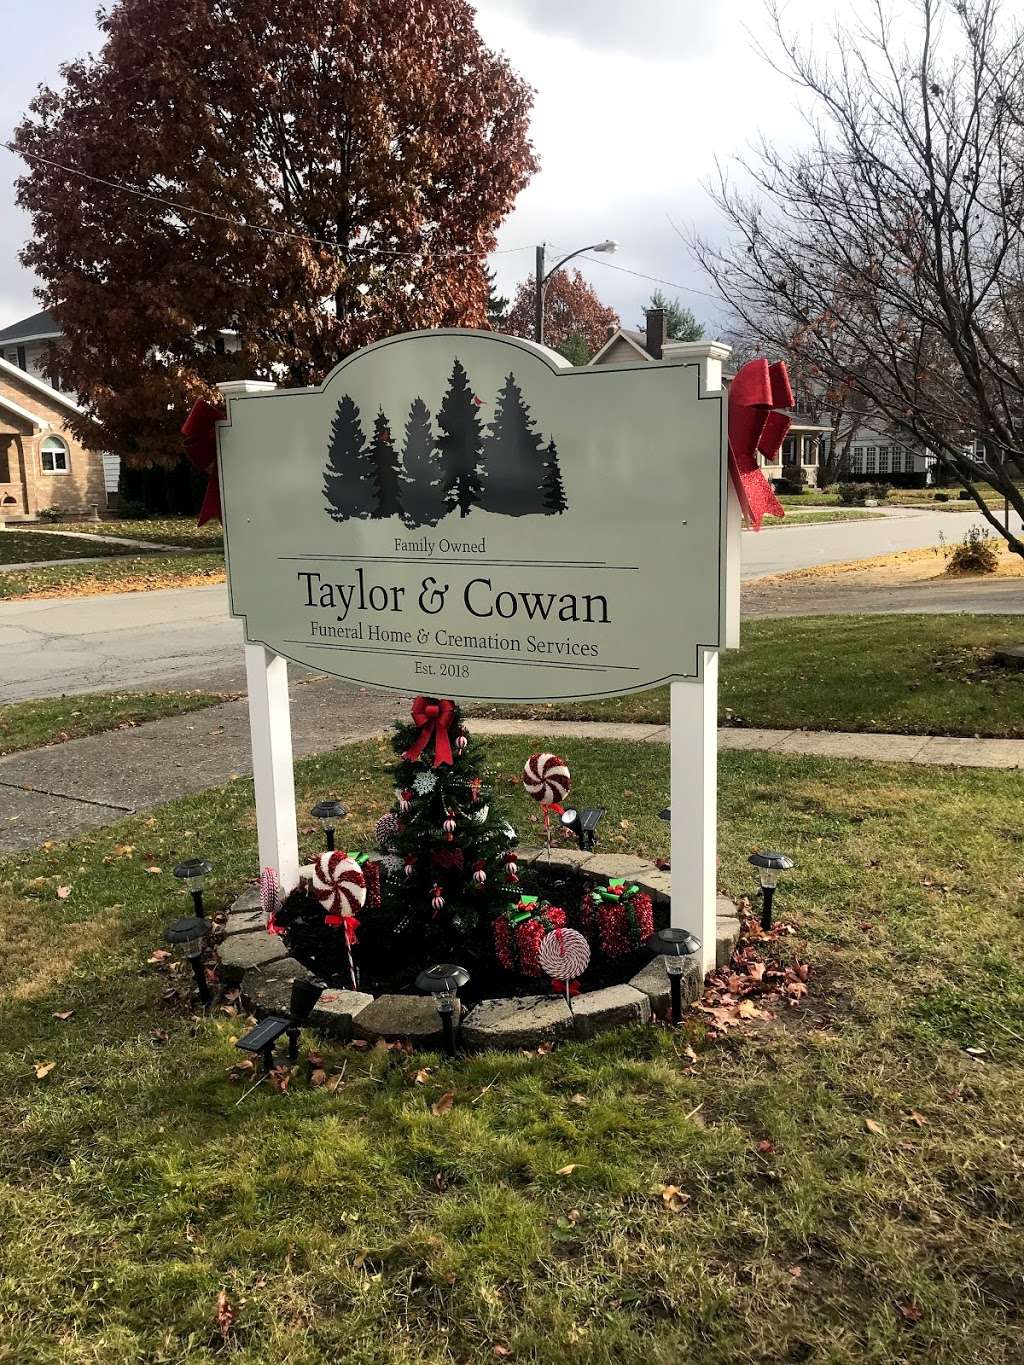 Taylor & Cowan Funeral Home and Cremation Services | 314 N Main St, Tipton, IN 46072 | Phone: (765) 675-2963